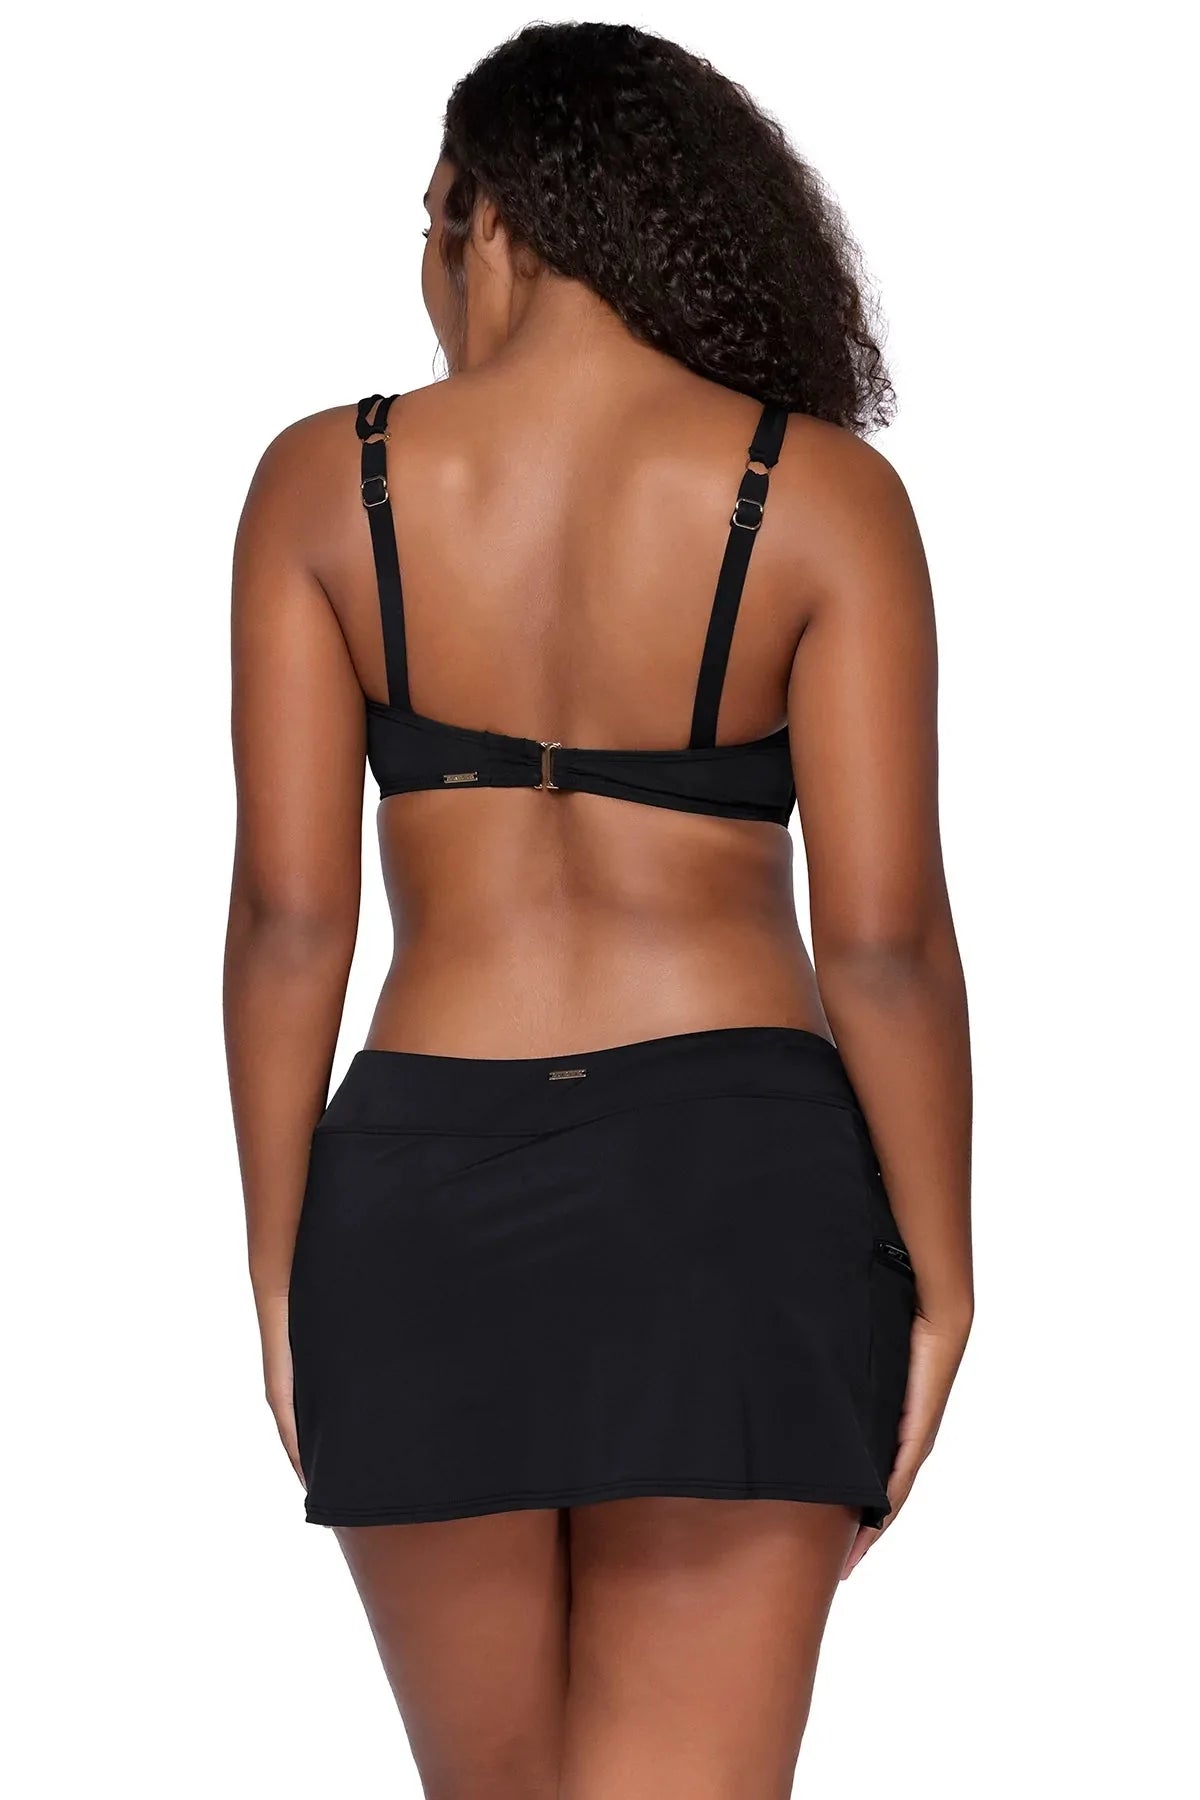 Lotus Sporty Swim Skirt, Mid-Rise with Built-in Bottom